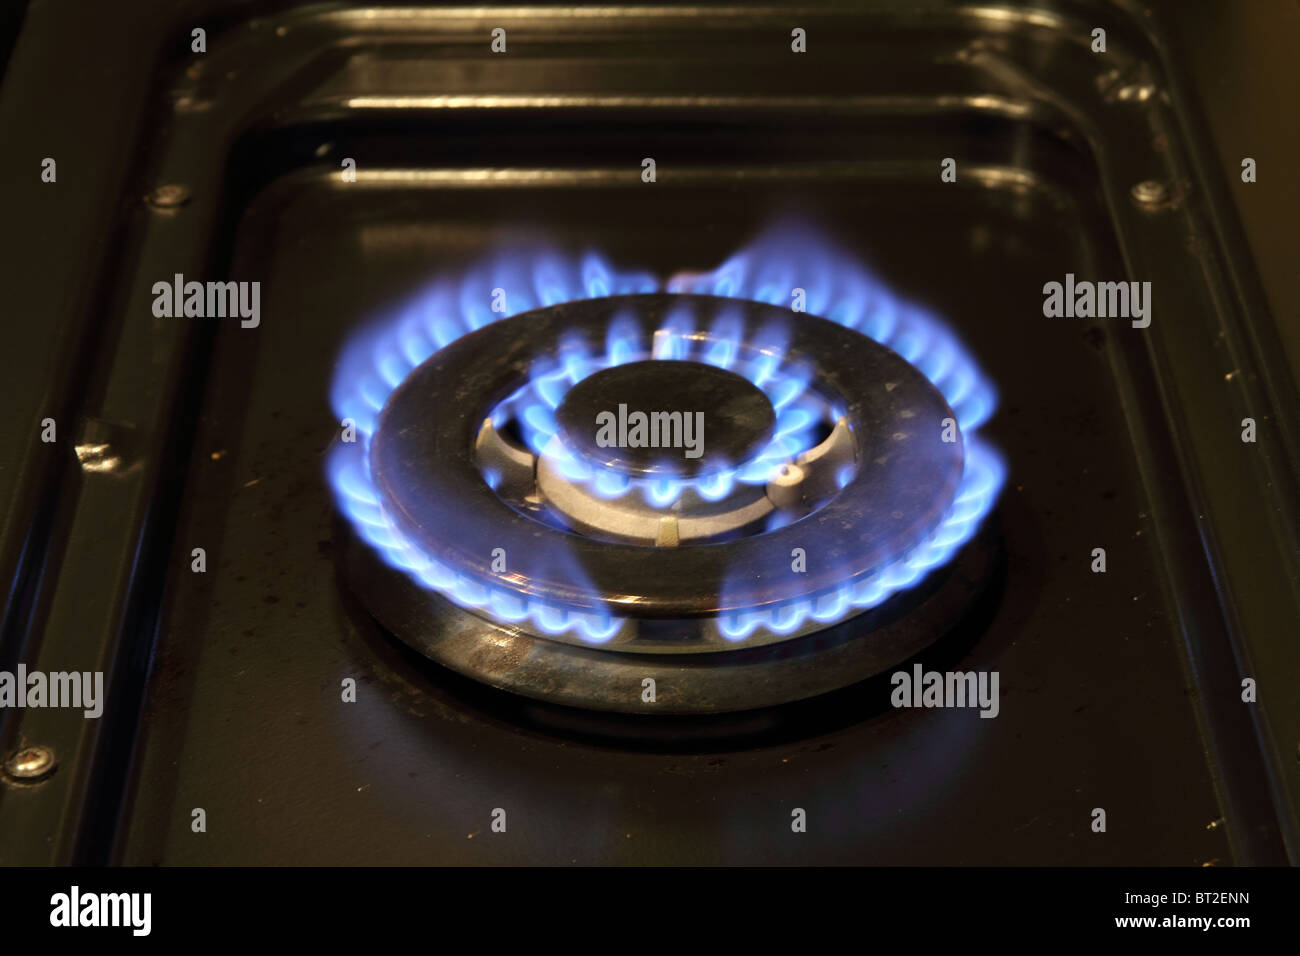 Domestic natural gas as used in UK households Stock Photo